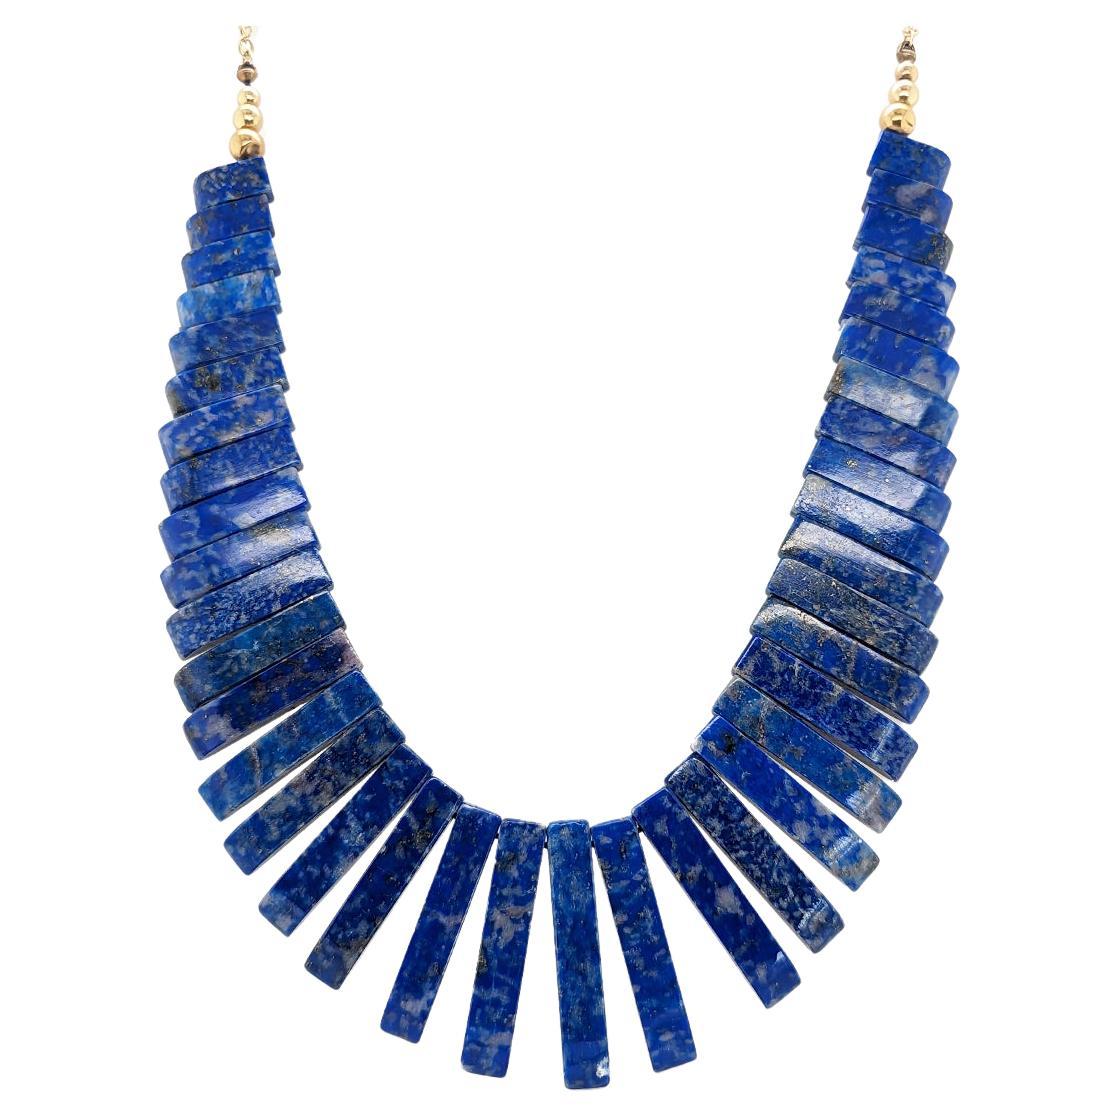 Estate Lapis Lazuli Collar Necklace with 14kt Yellow Gold Beads and Chain